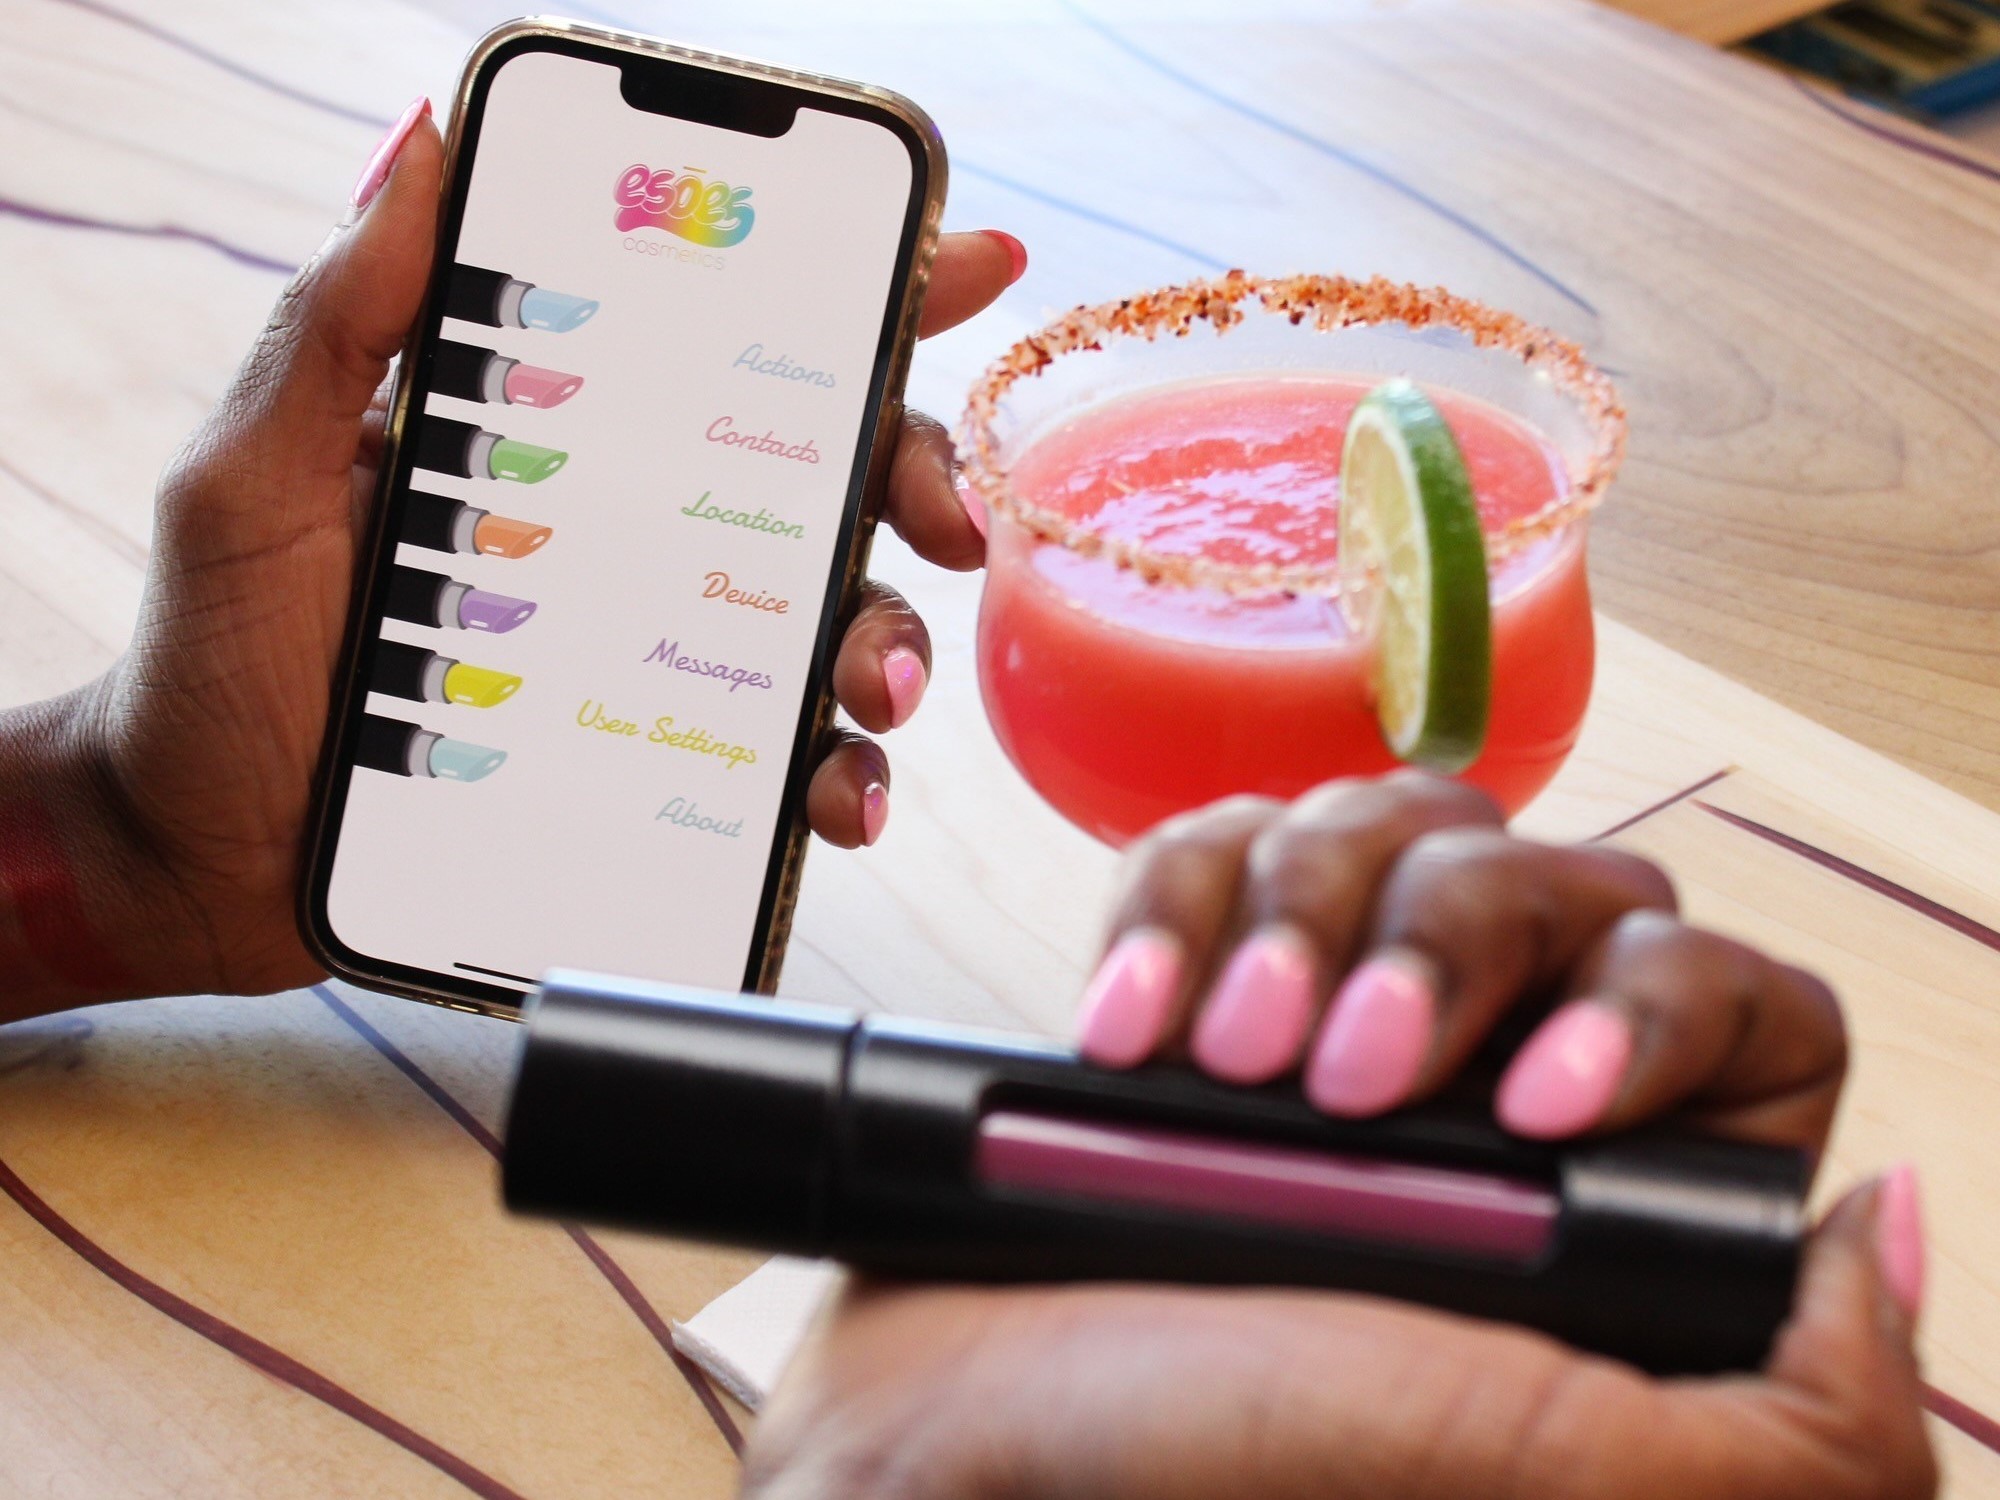 The Esōes Liquid Lipstick comes in five different shades and is connected via an app to a user's phone [Image: Esōes]